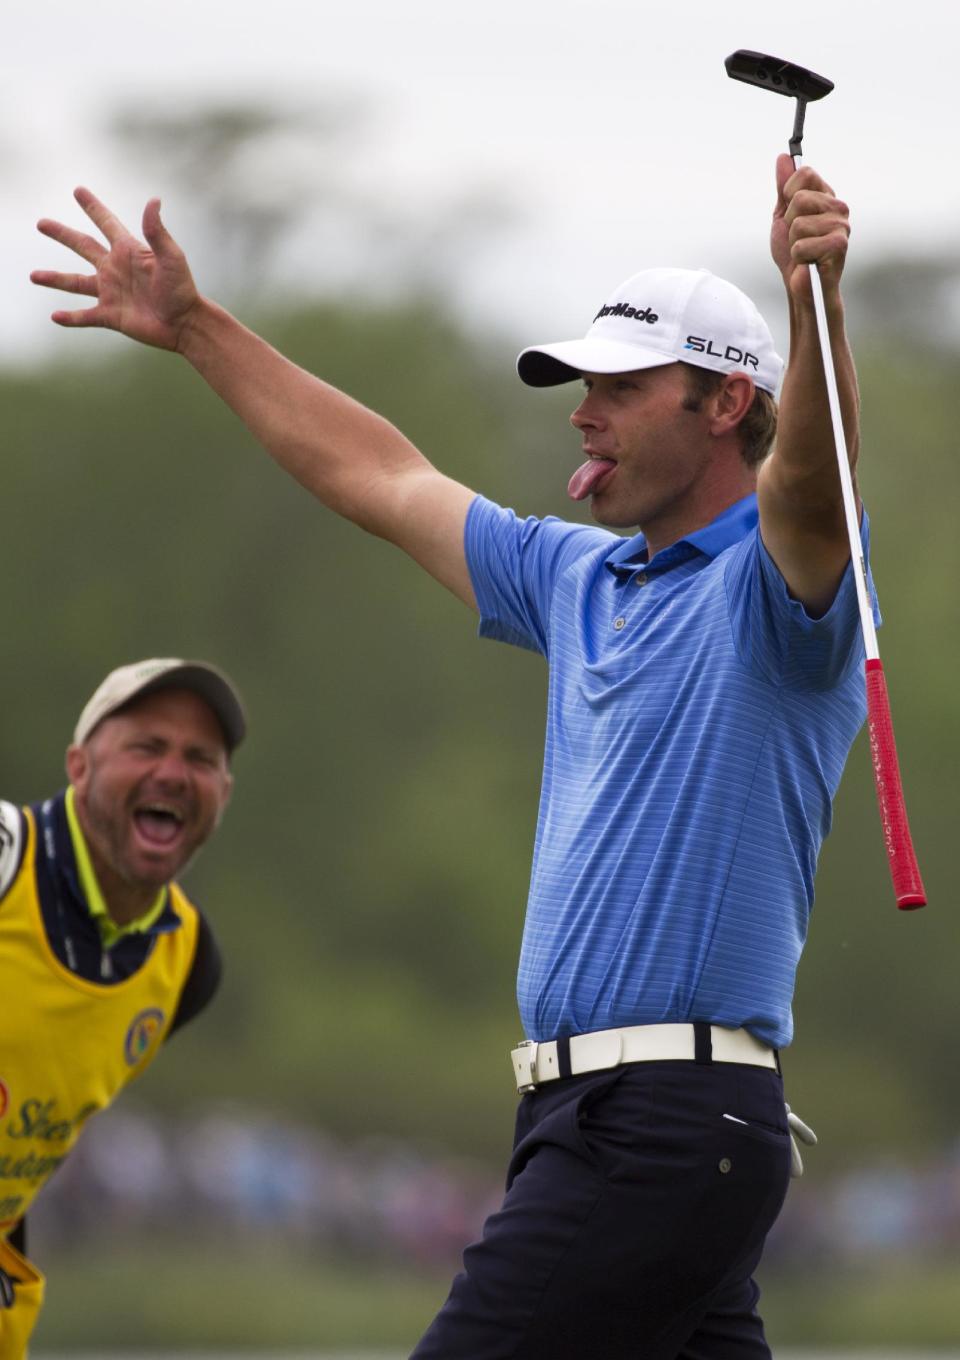 Shawn Stefani, right, celebrates after sinking in a birdie on the eighteenth hole during the third round of the Houston Open golf tournament on Saturday, April 5, 2014, in Humble, Texas. (AP Photo/Patric Schneider)